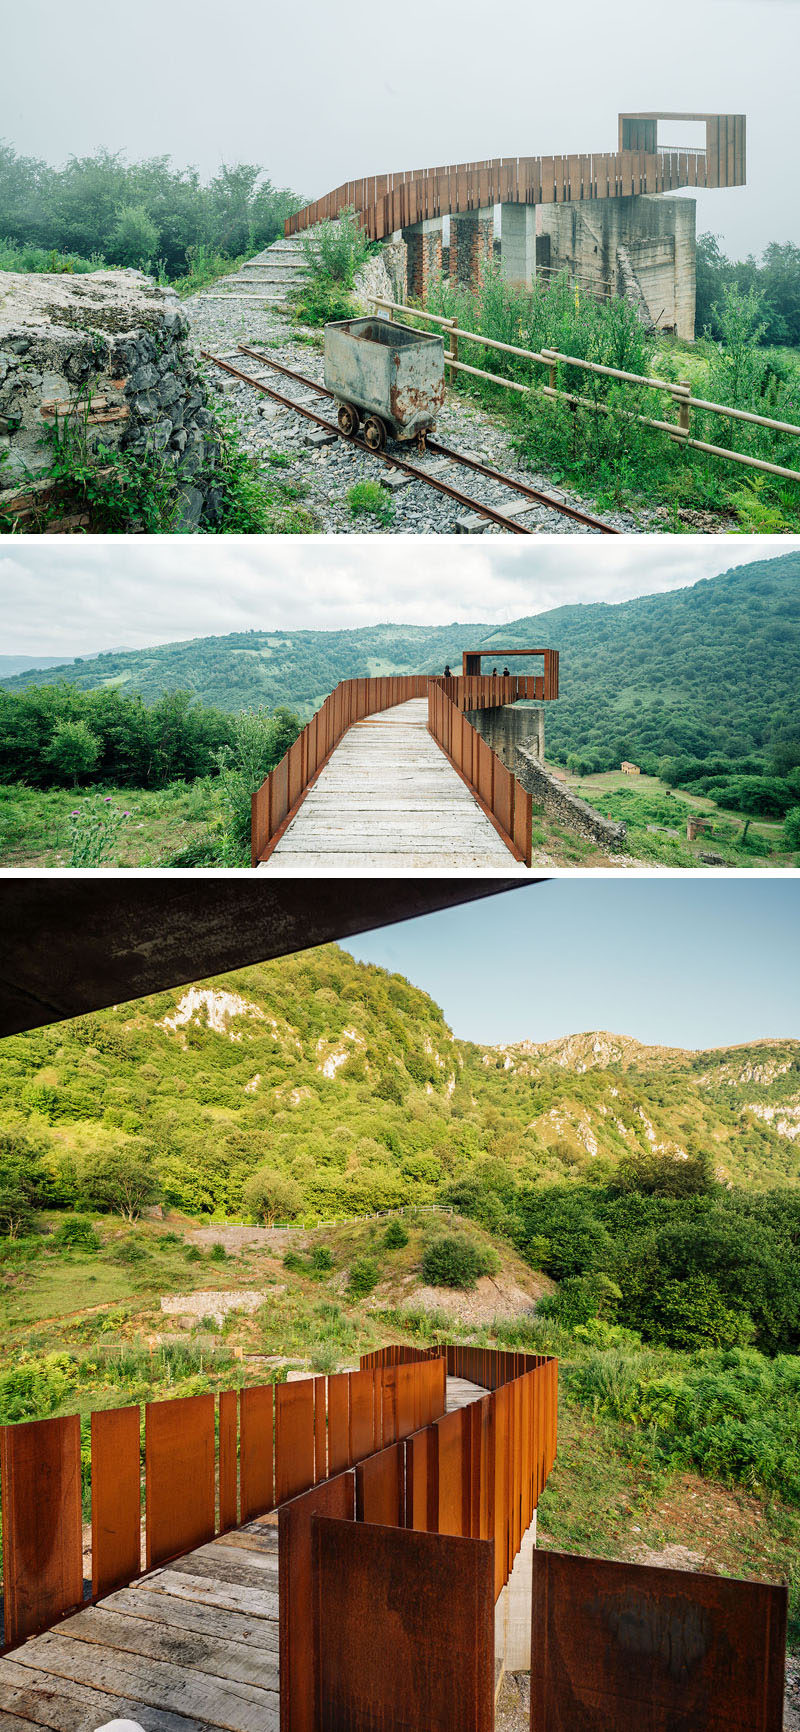 This striking walkway and lookout at an old mining site near Riosa, Spain, is made from concrete, rusty steel and recycled wood, and acts as a rest stop and viewing point for visitors.